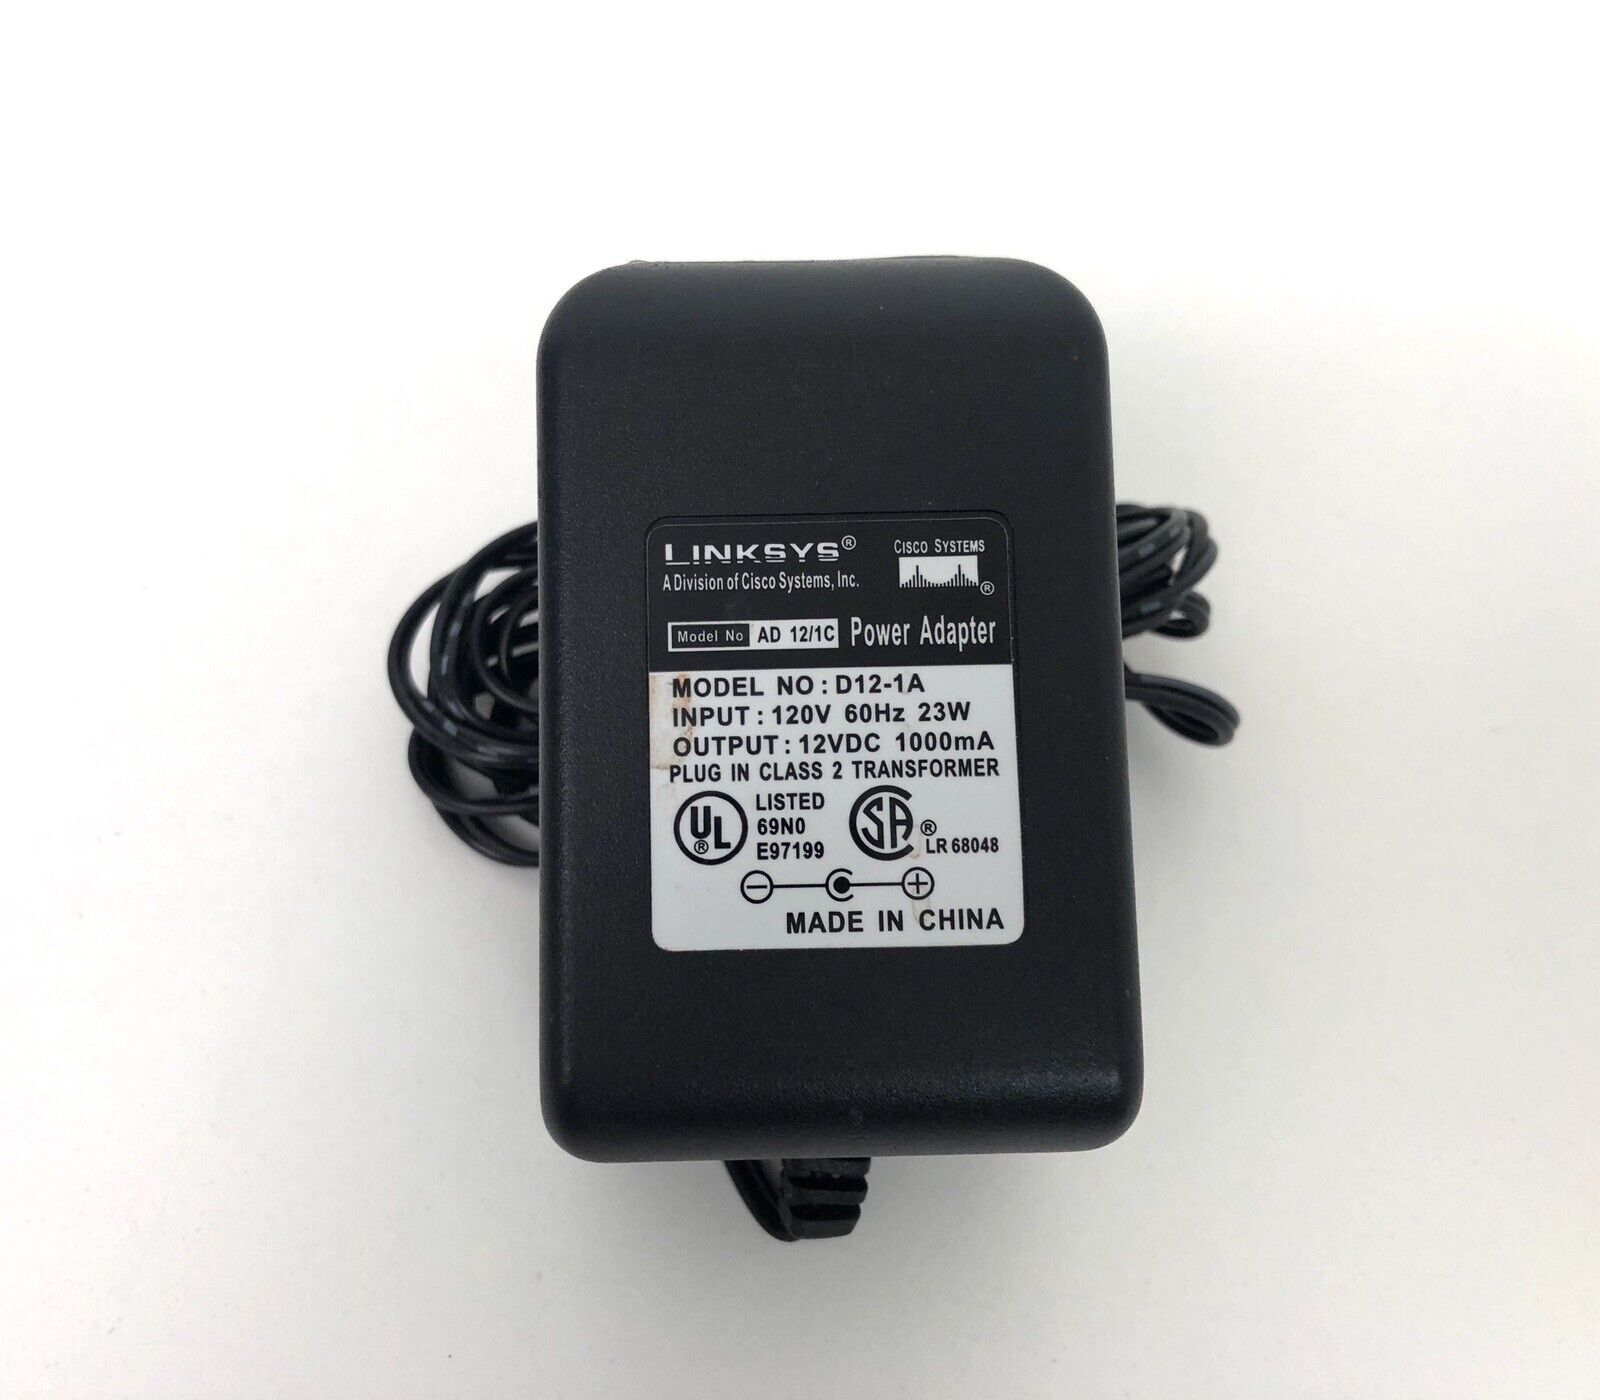 Original Linksys 12 Volt 1000mA D12-1A AC Wall Power Supply Adapter Output 12VDC Brand: Linksys Number of Ports: 12